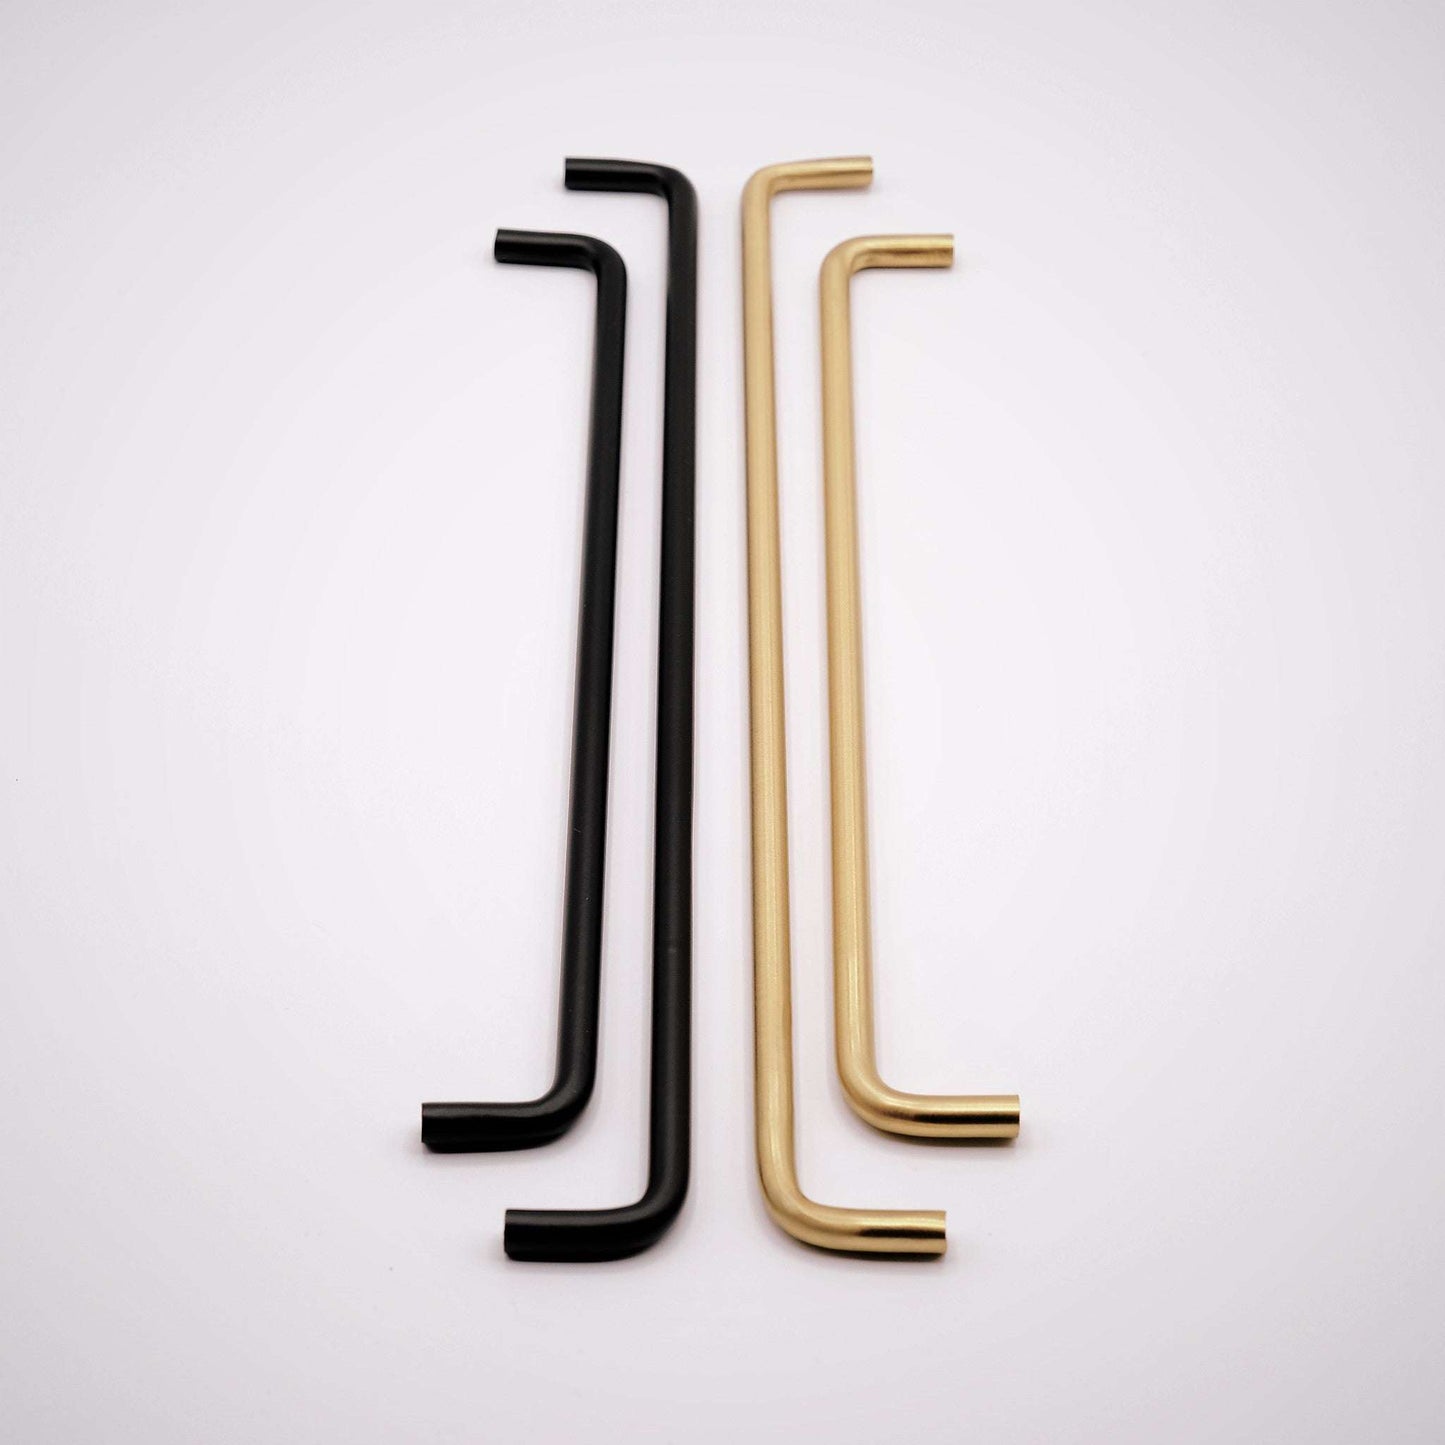 Arch, Solid Brass Wire Cabinet Pulls